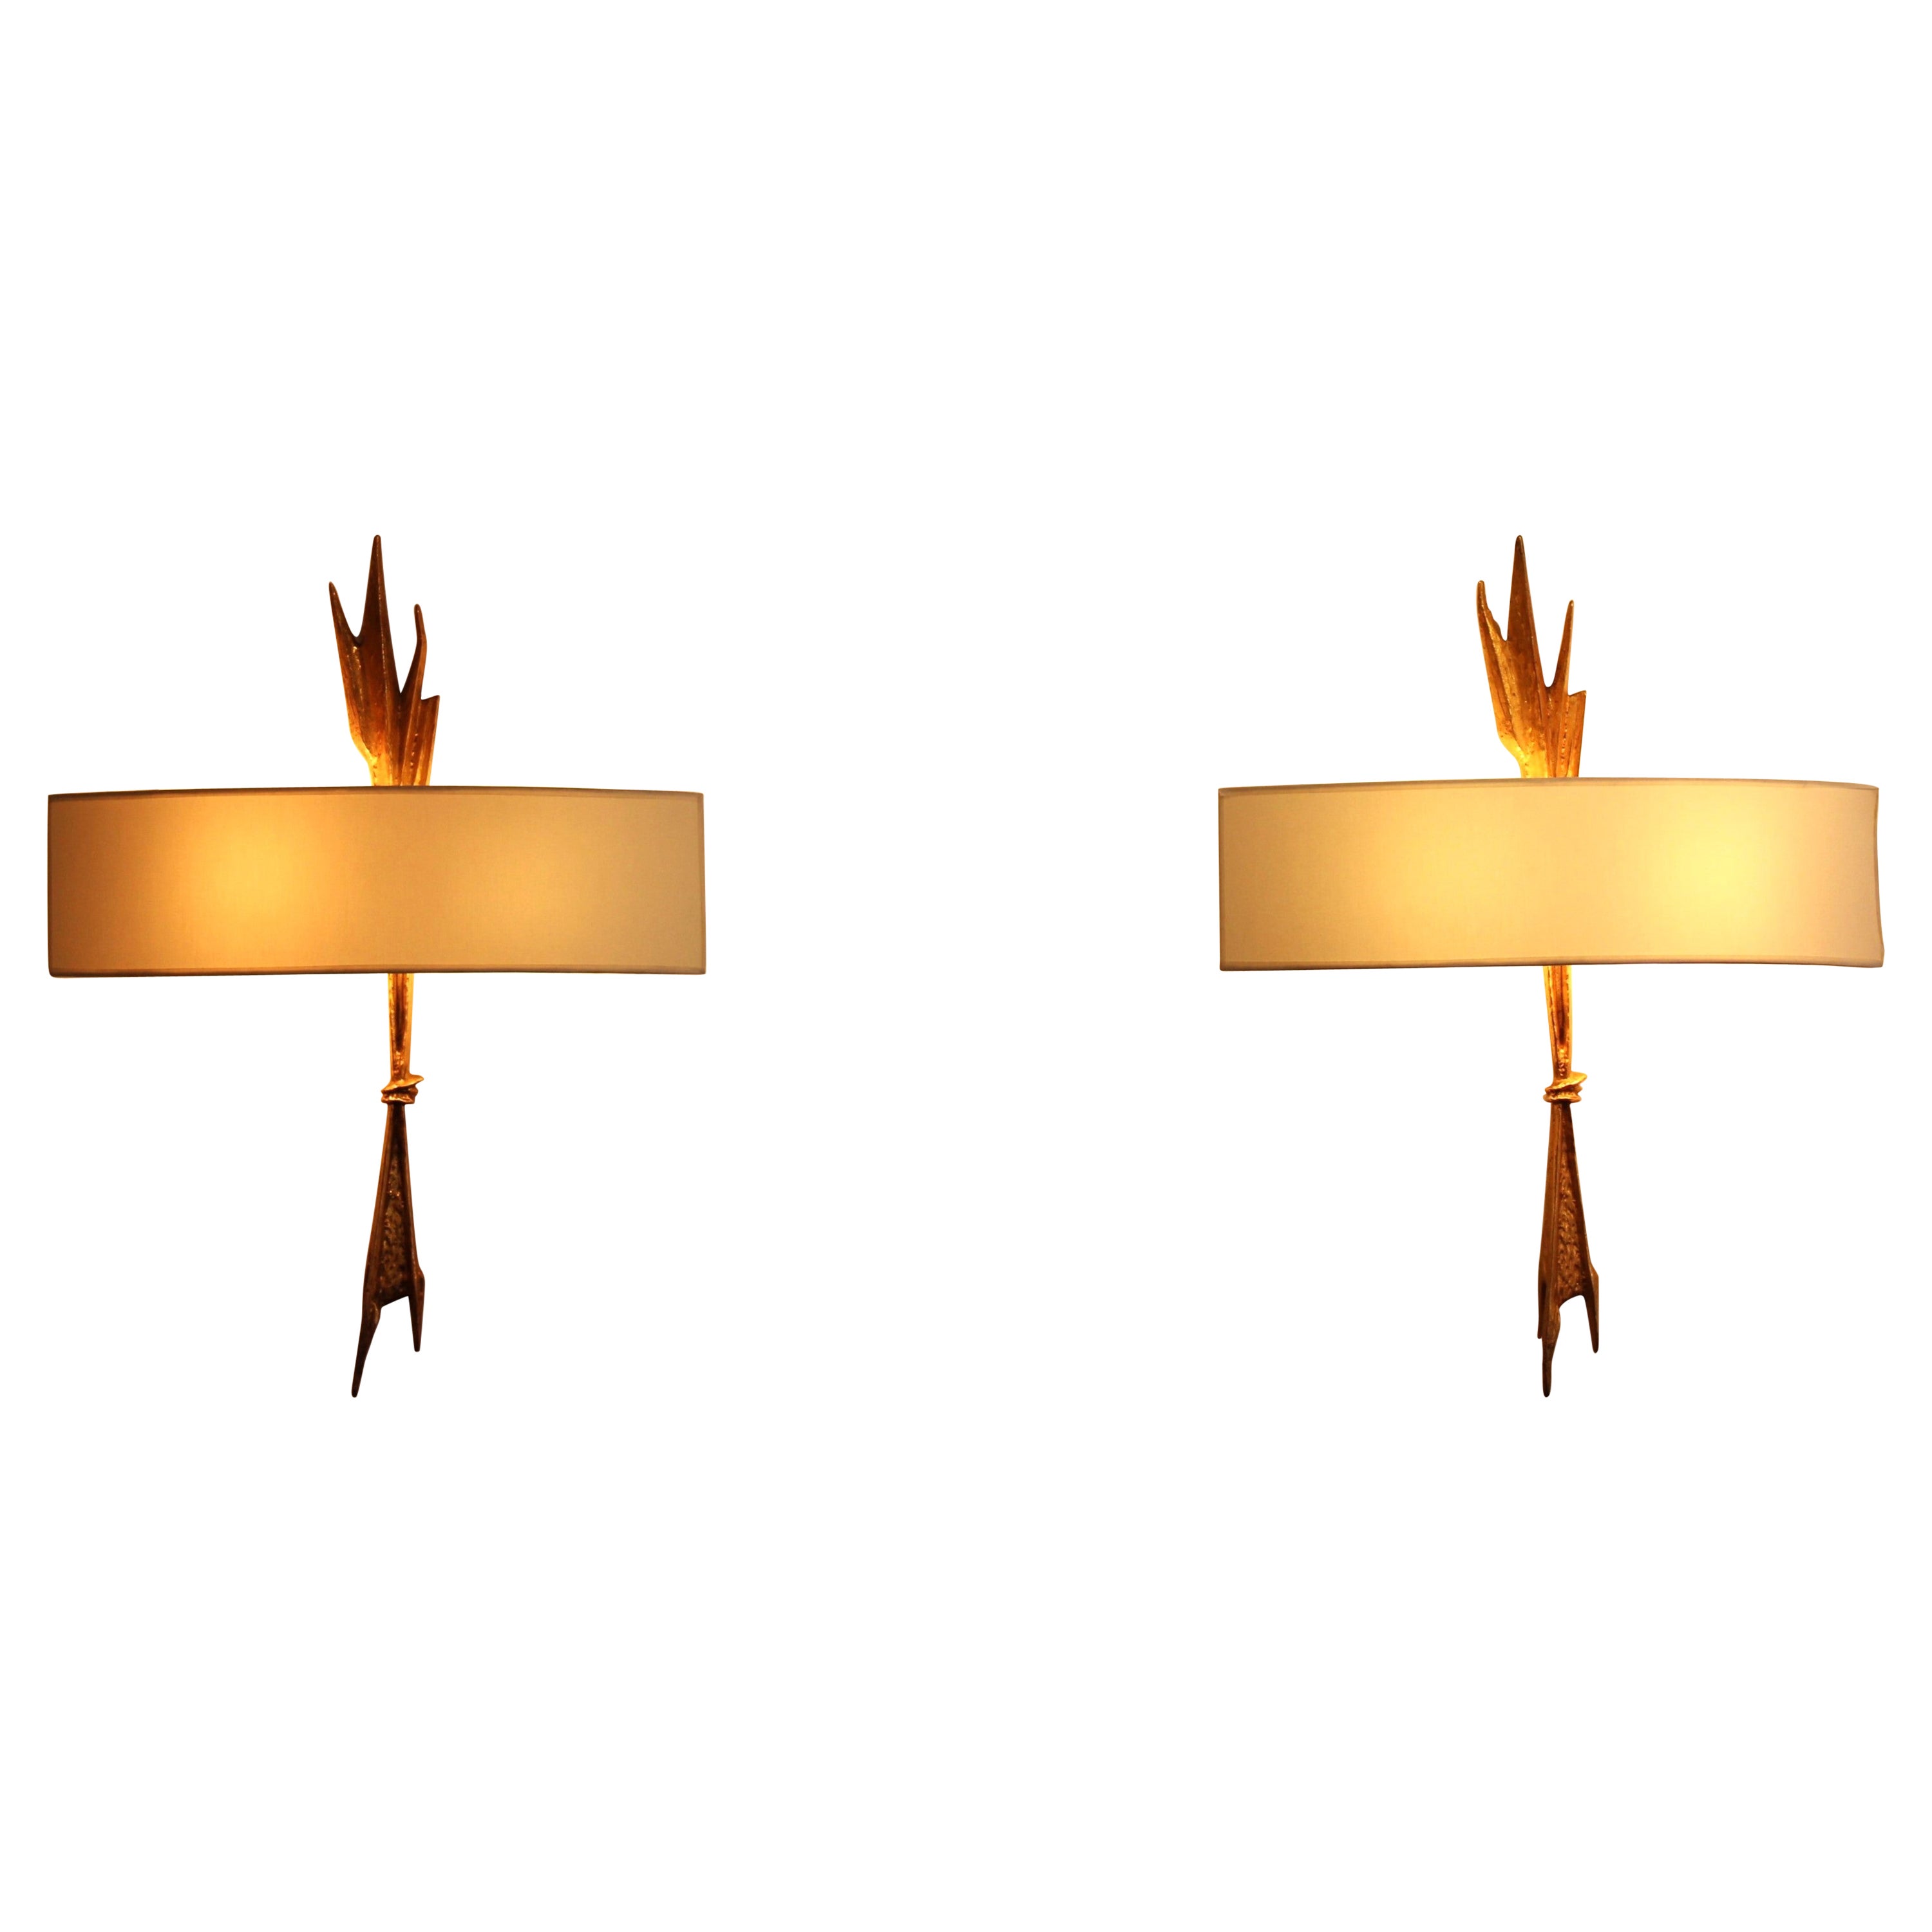 Pair of wall lights by Felix Agostini, "Amour Ardent"